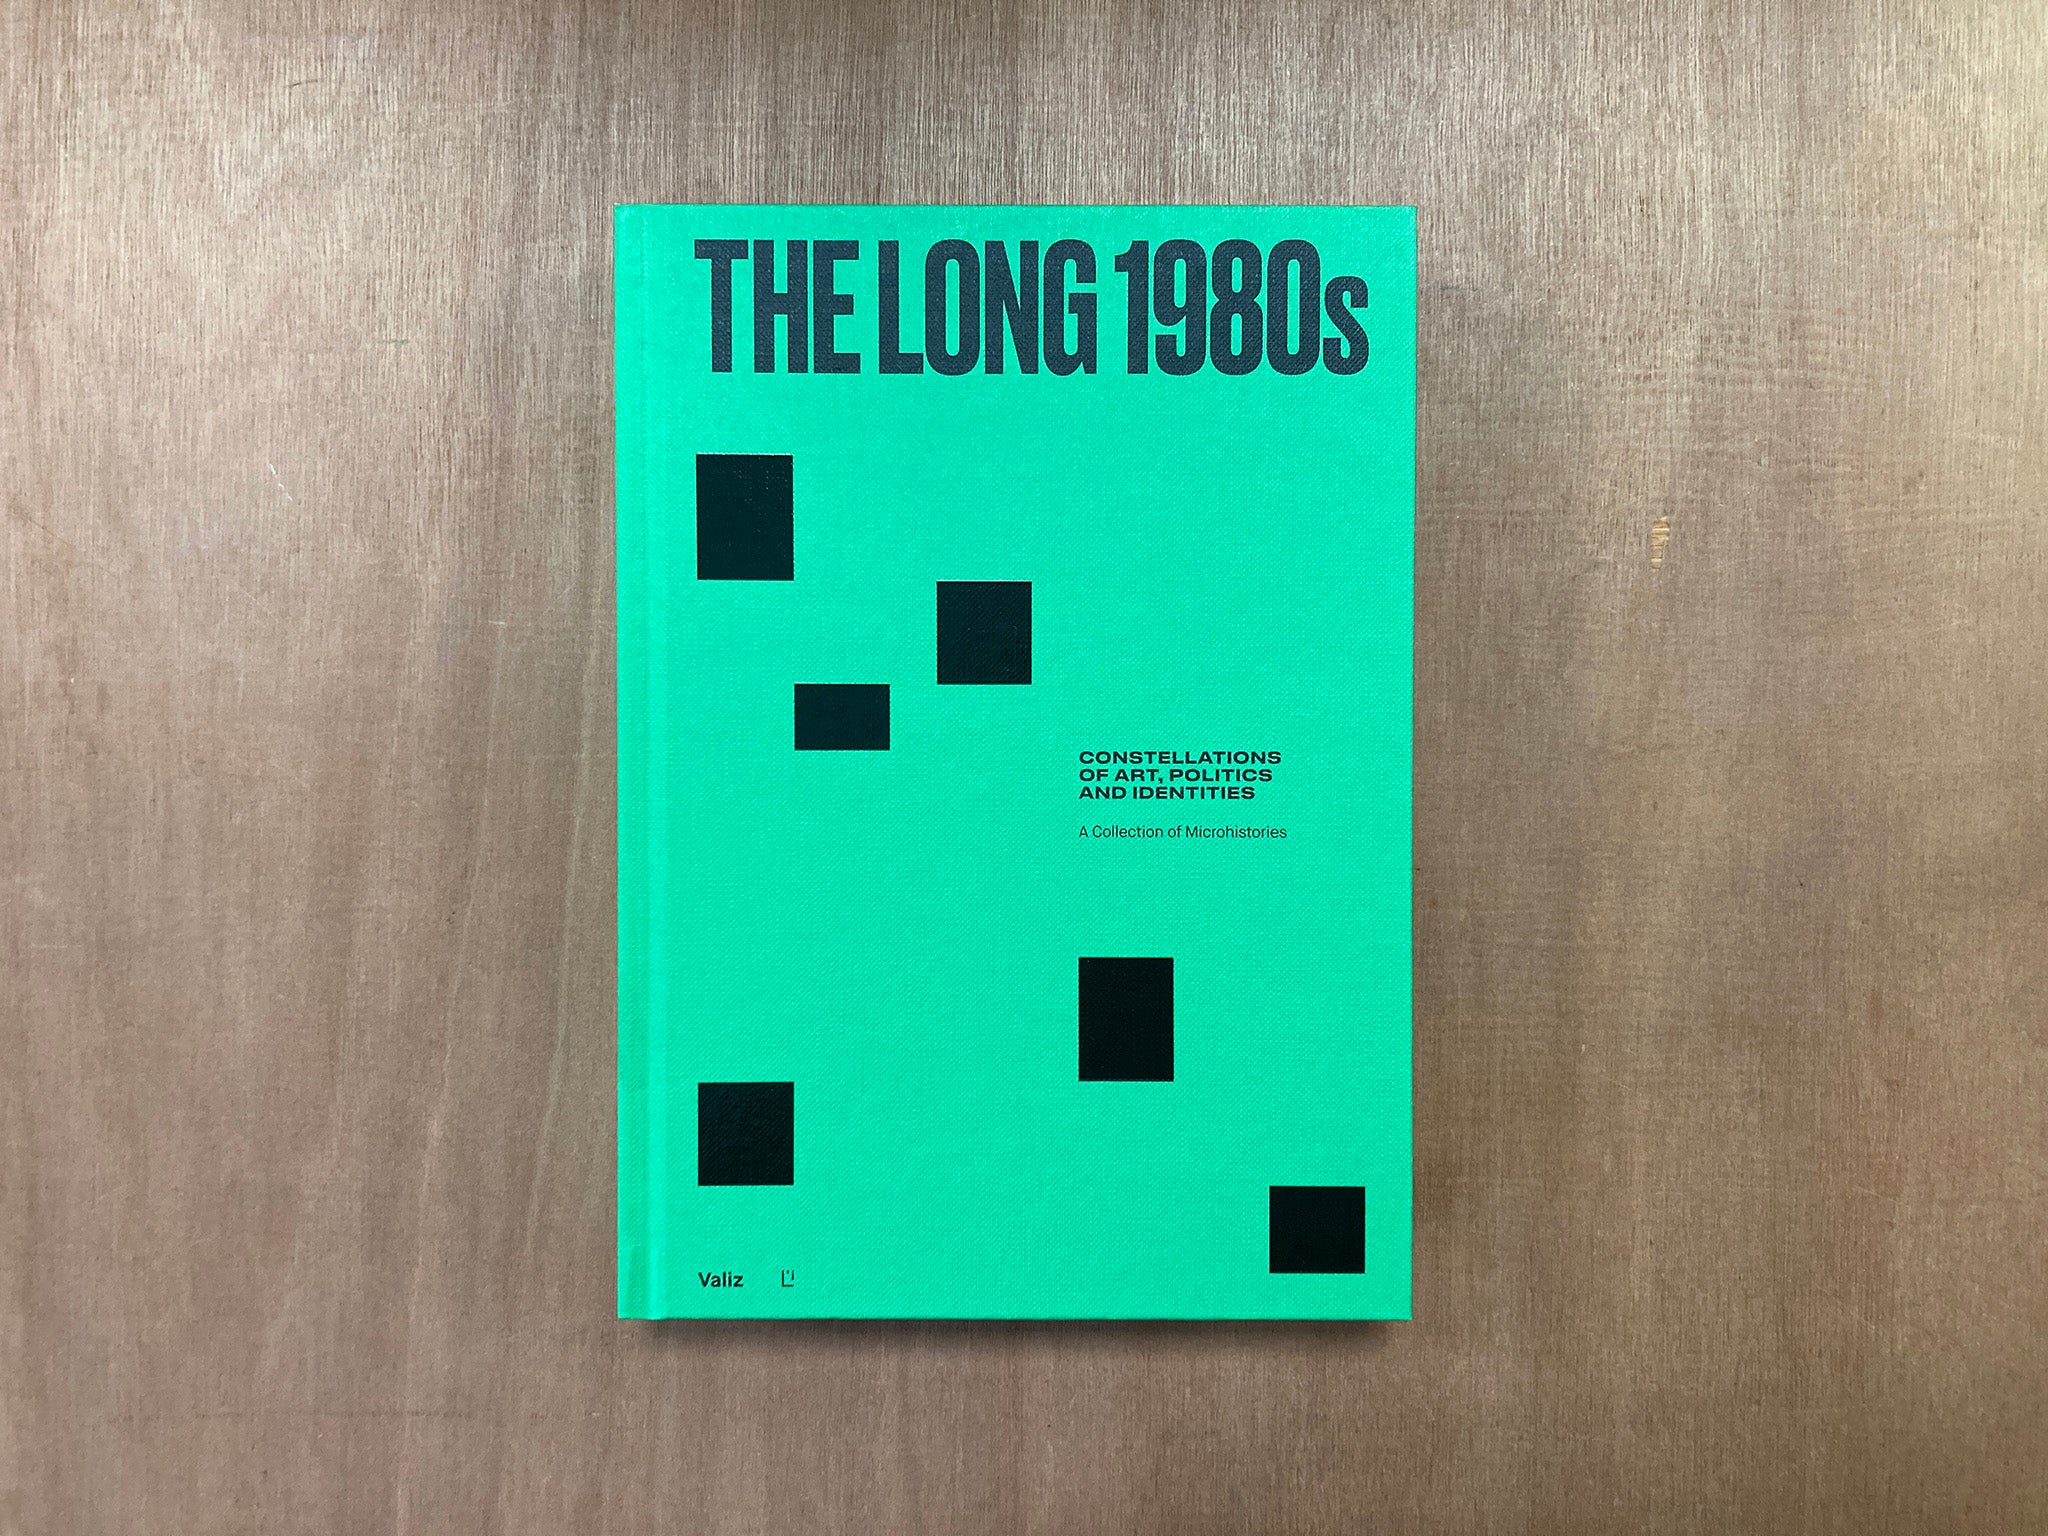 THE LONG 1980S: CONSTELLATIONS OF ART, POLITICS, AND IDENTITIES: A COLLECTION OF MICROHISTORIES